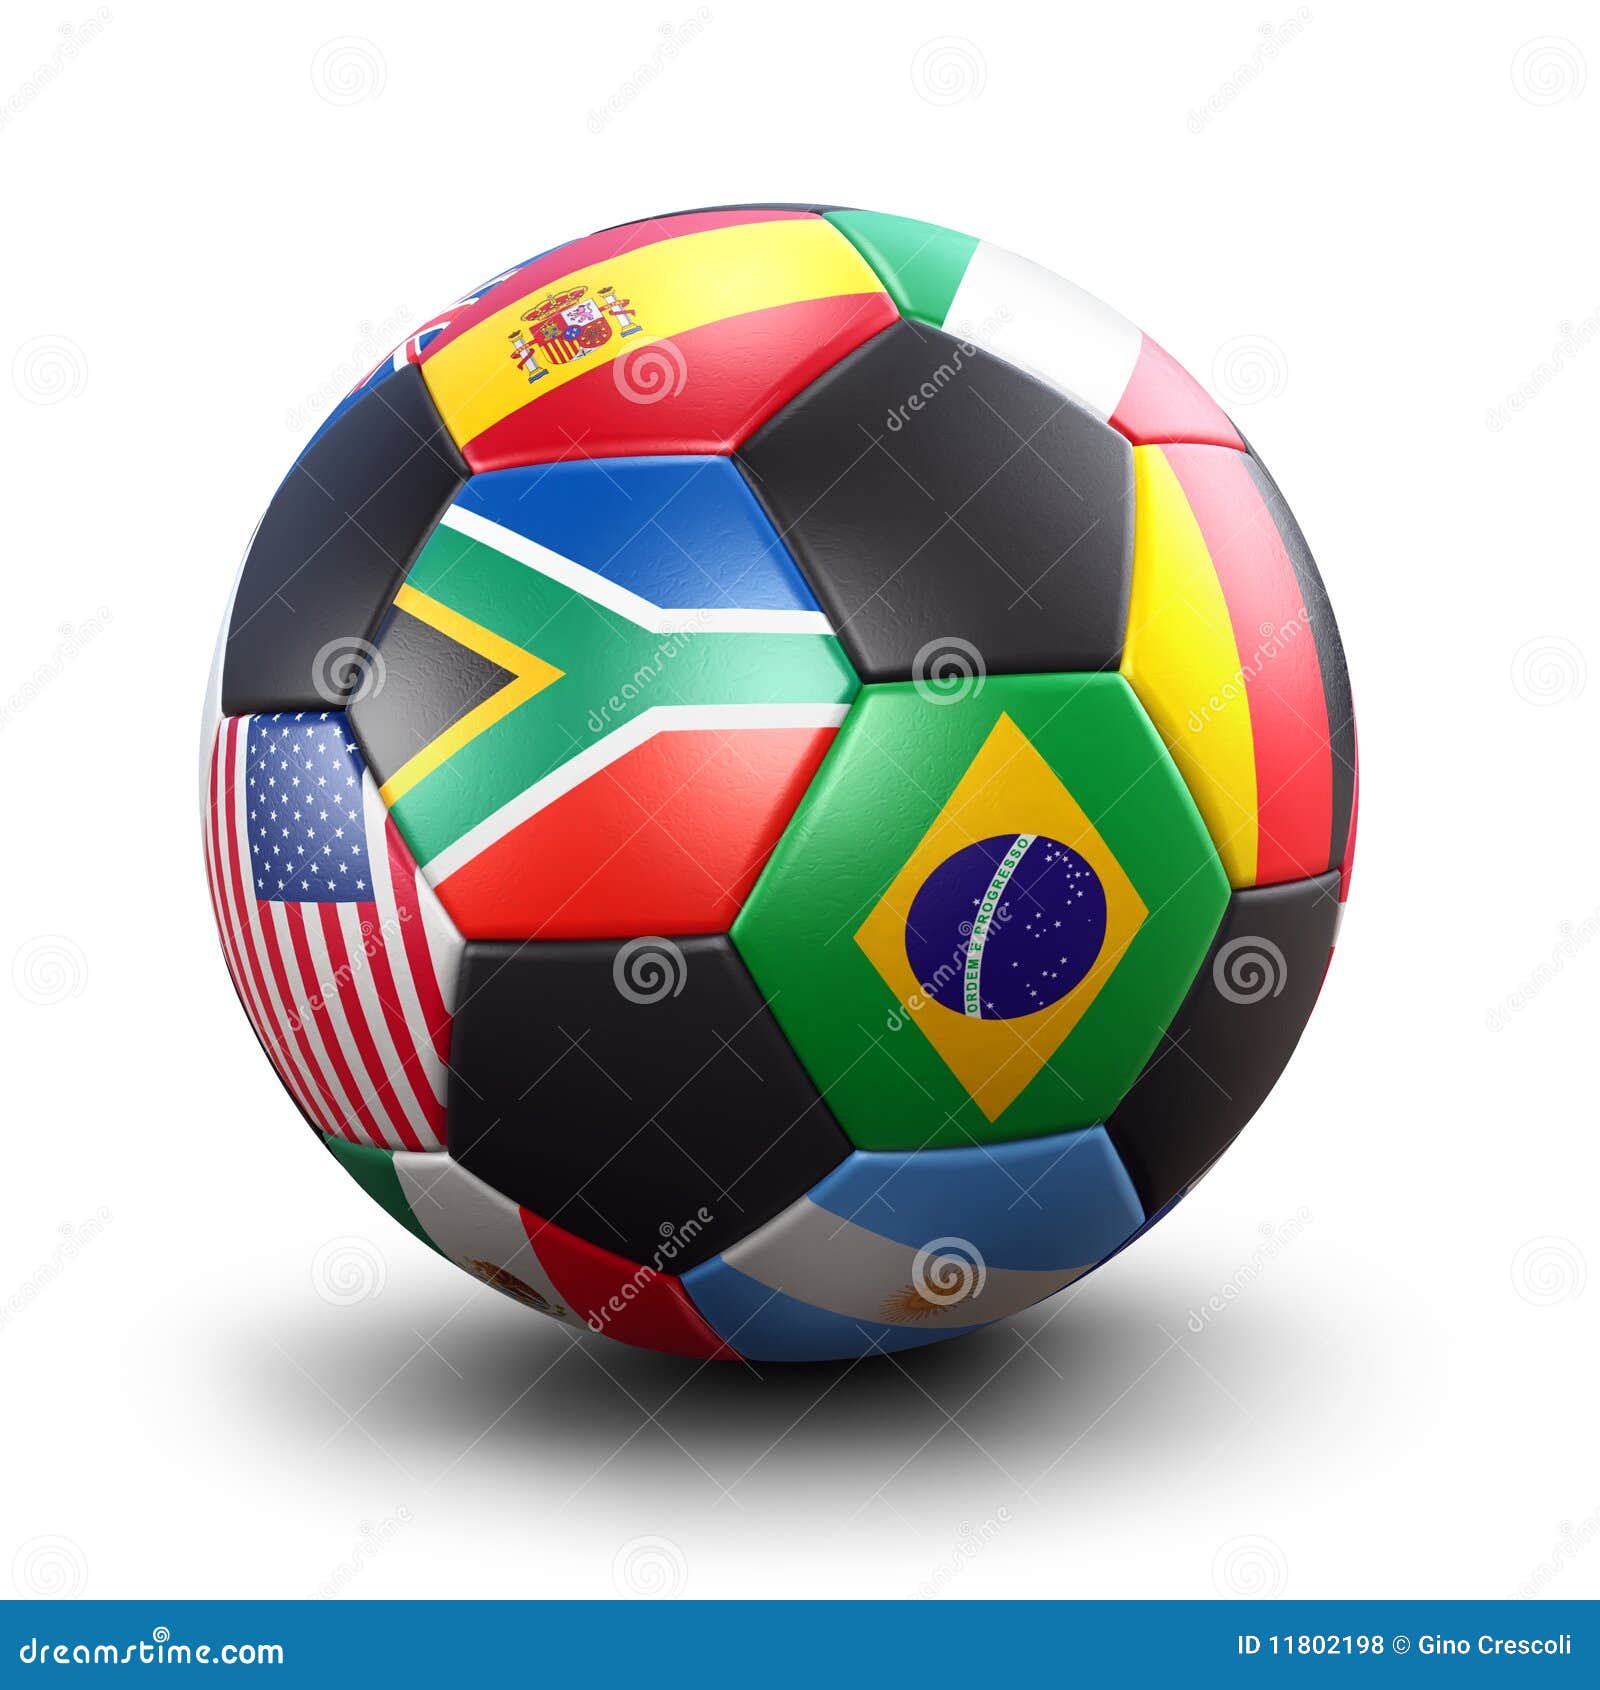 clipart world cup soccer - photo #30